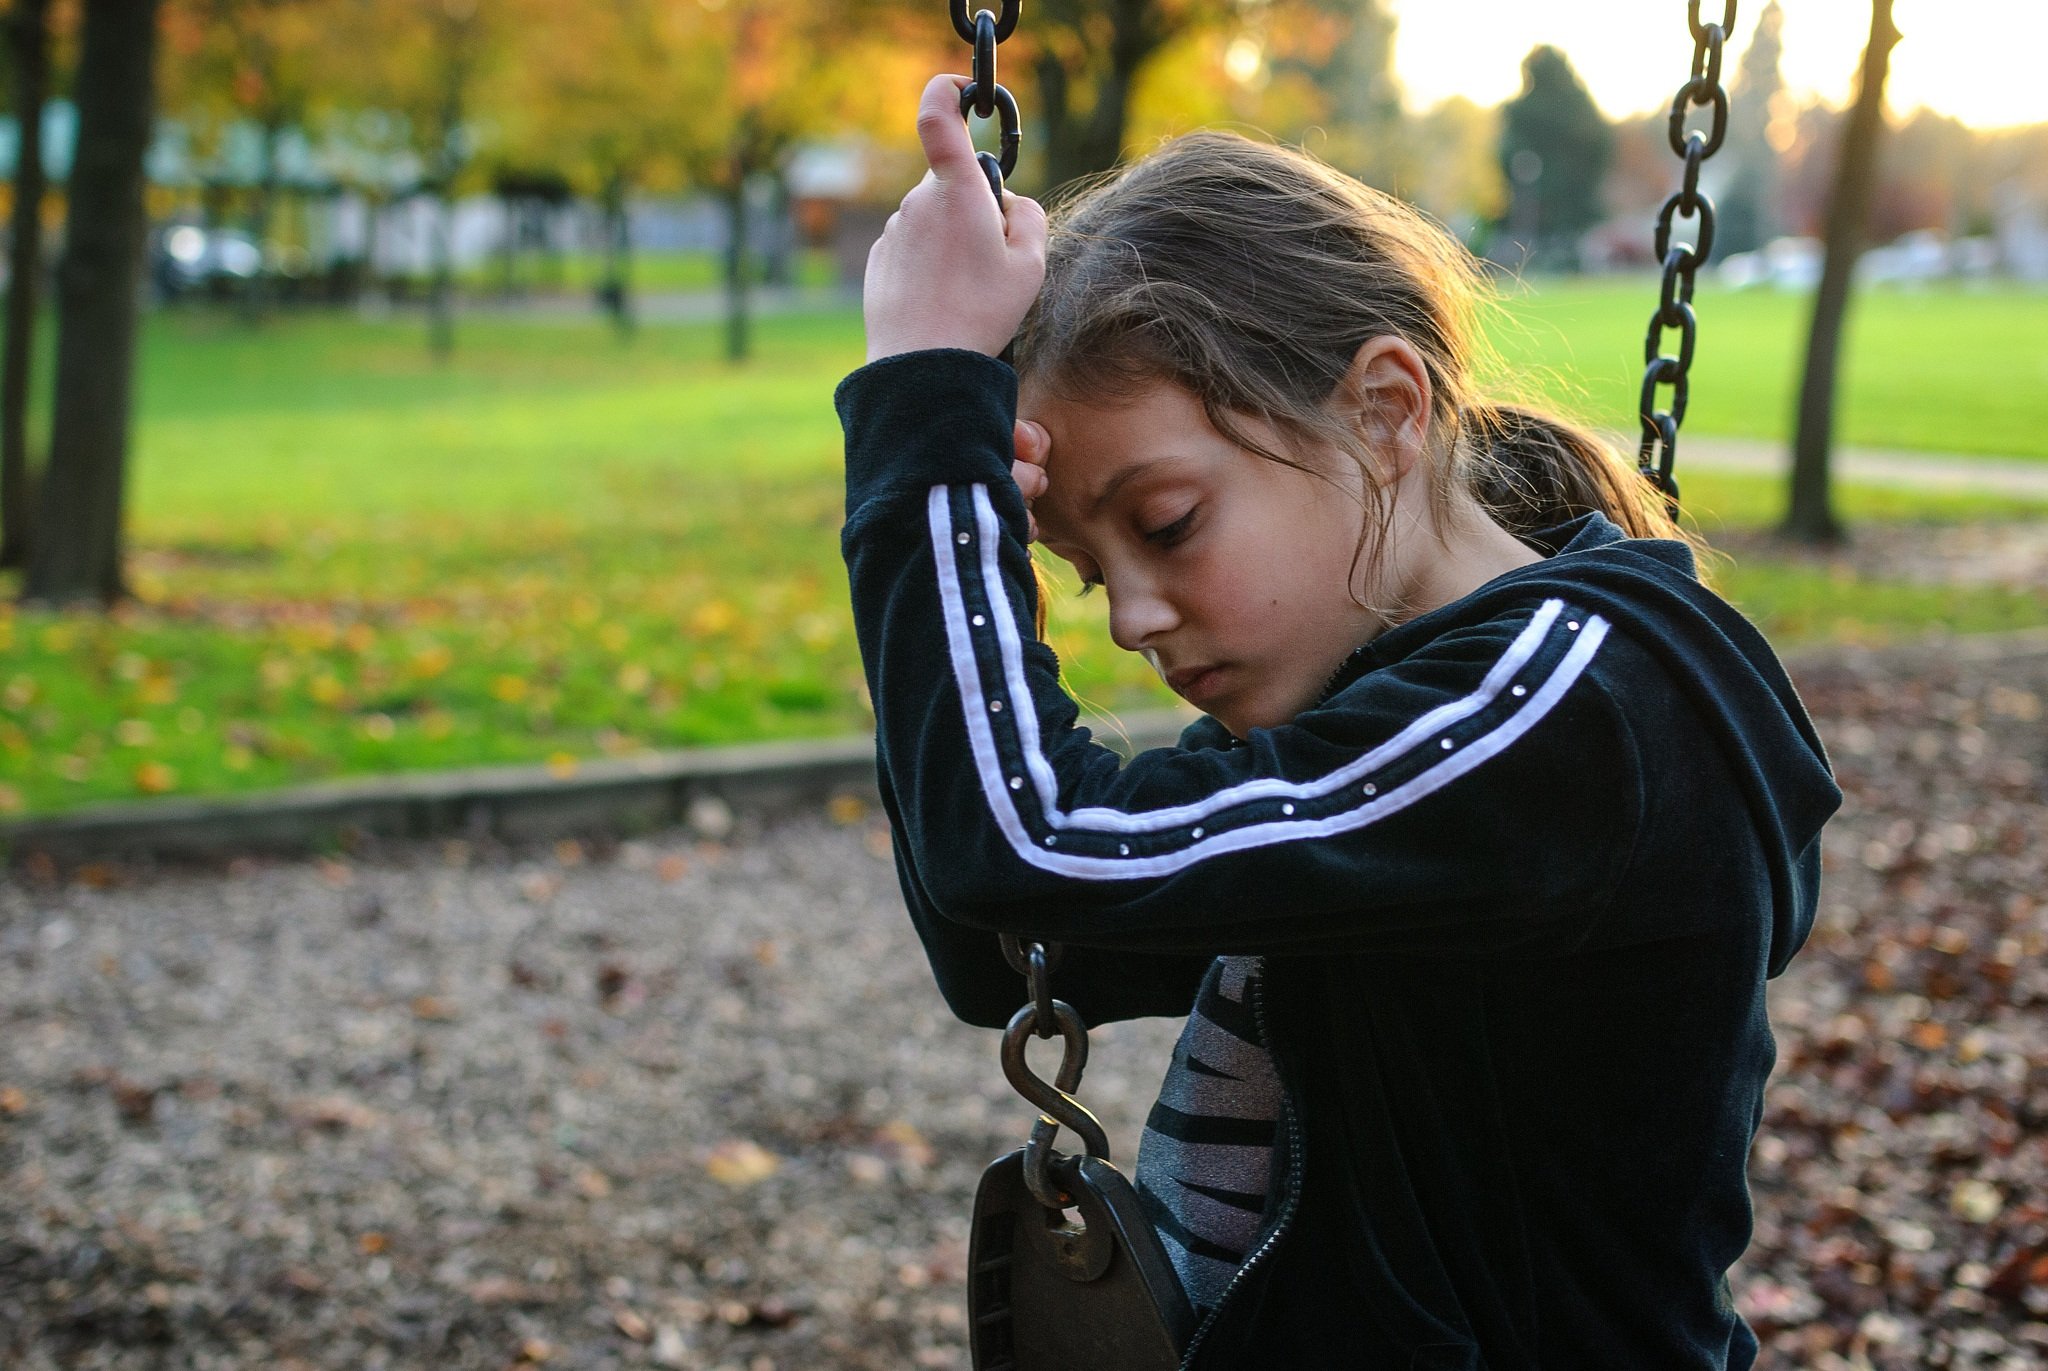 21 Things To Do When You Find It Hard To Let Go